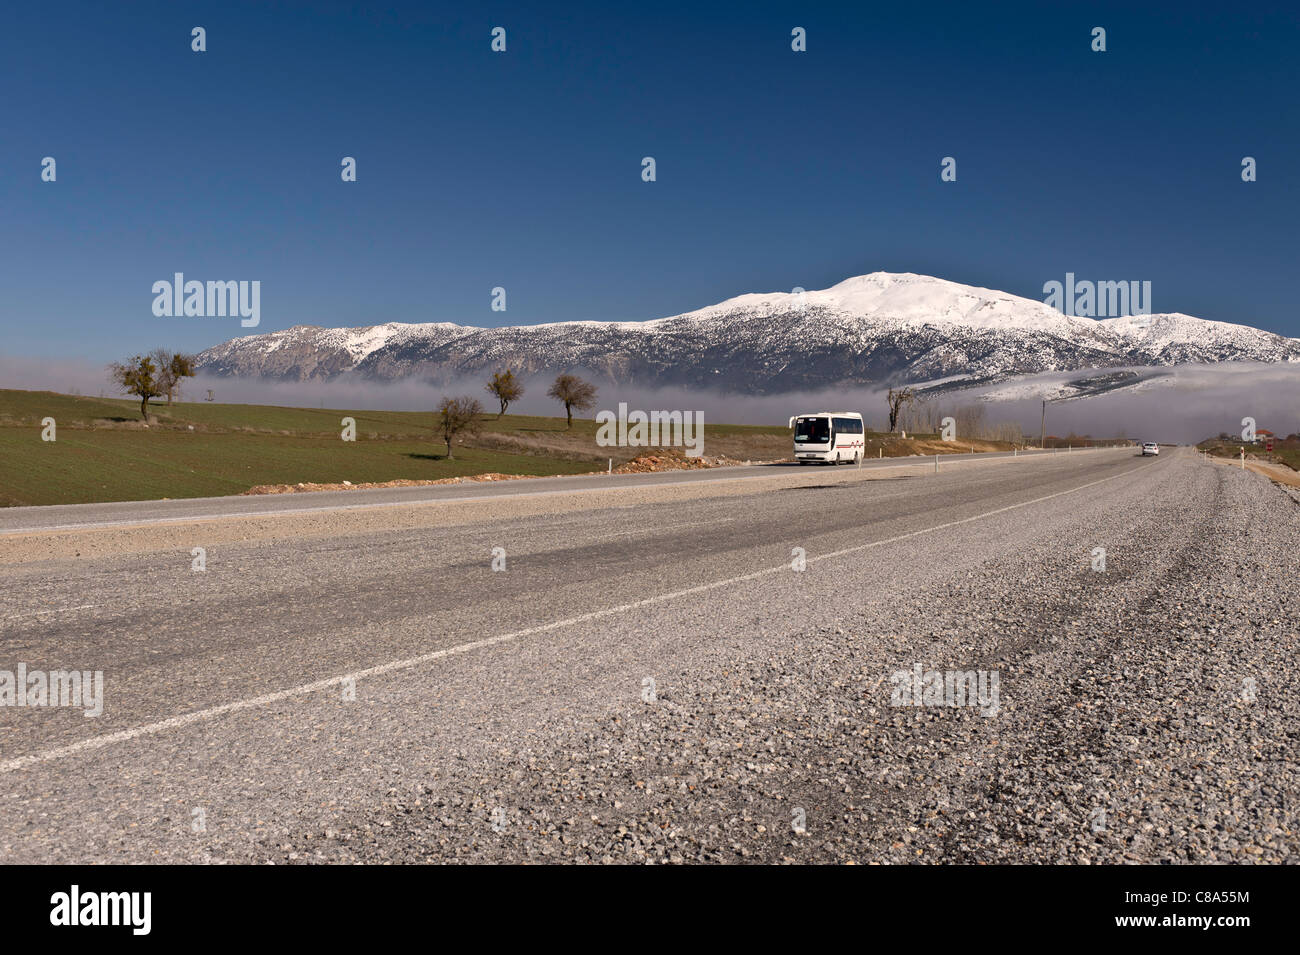 Winter on the D87 highway, approaching the city of Denizli. Stock Photo